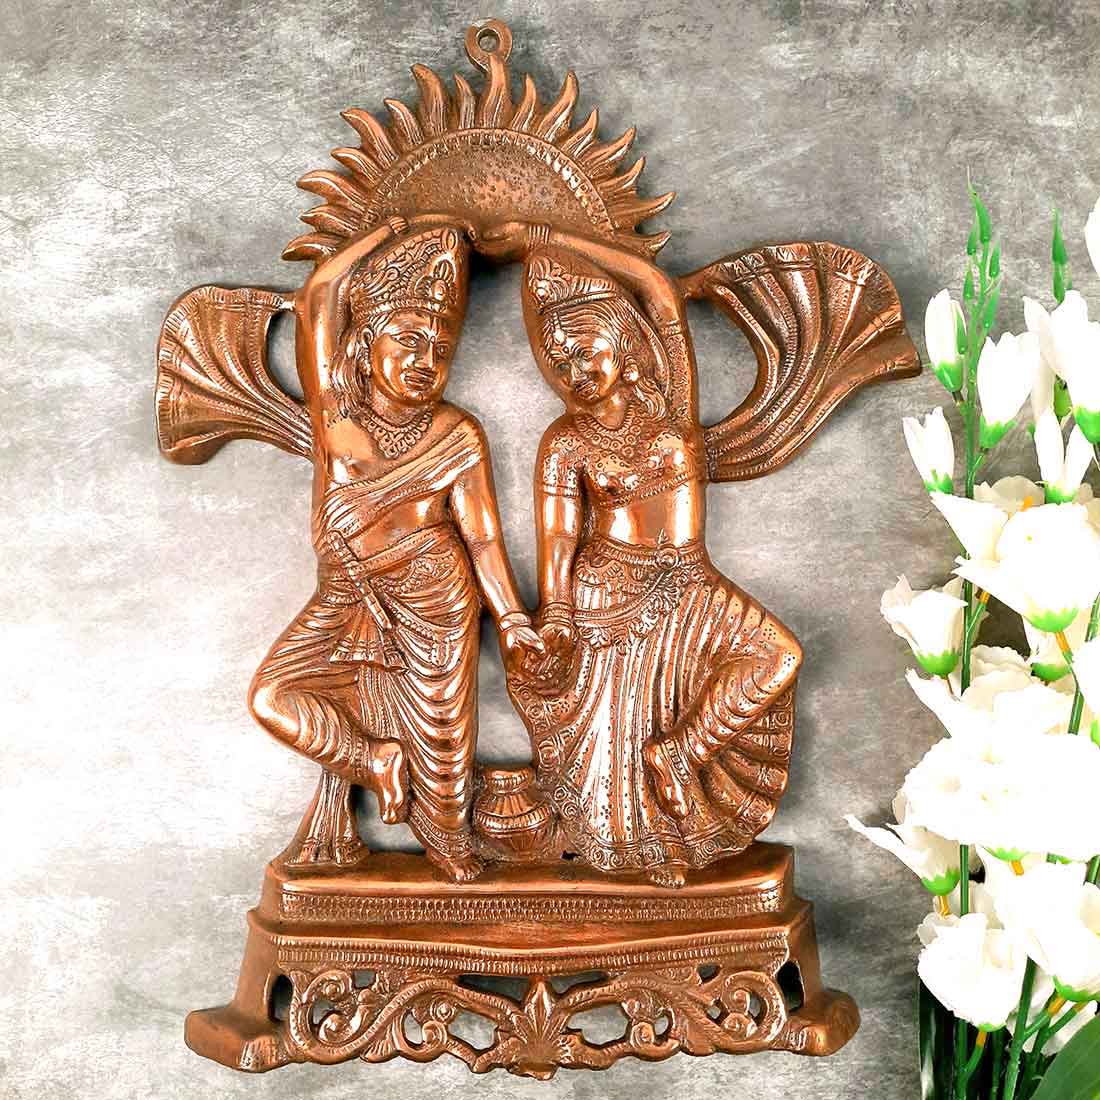 Radha Krishna Idol Wall Hanging Art | Radhe Krishna Dancing Wall Statue Murti | Wedding Gift for Couples | Religious Gift - for Home, Living Room, Office, Puja , Entrance Decoration  - 19 Inch